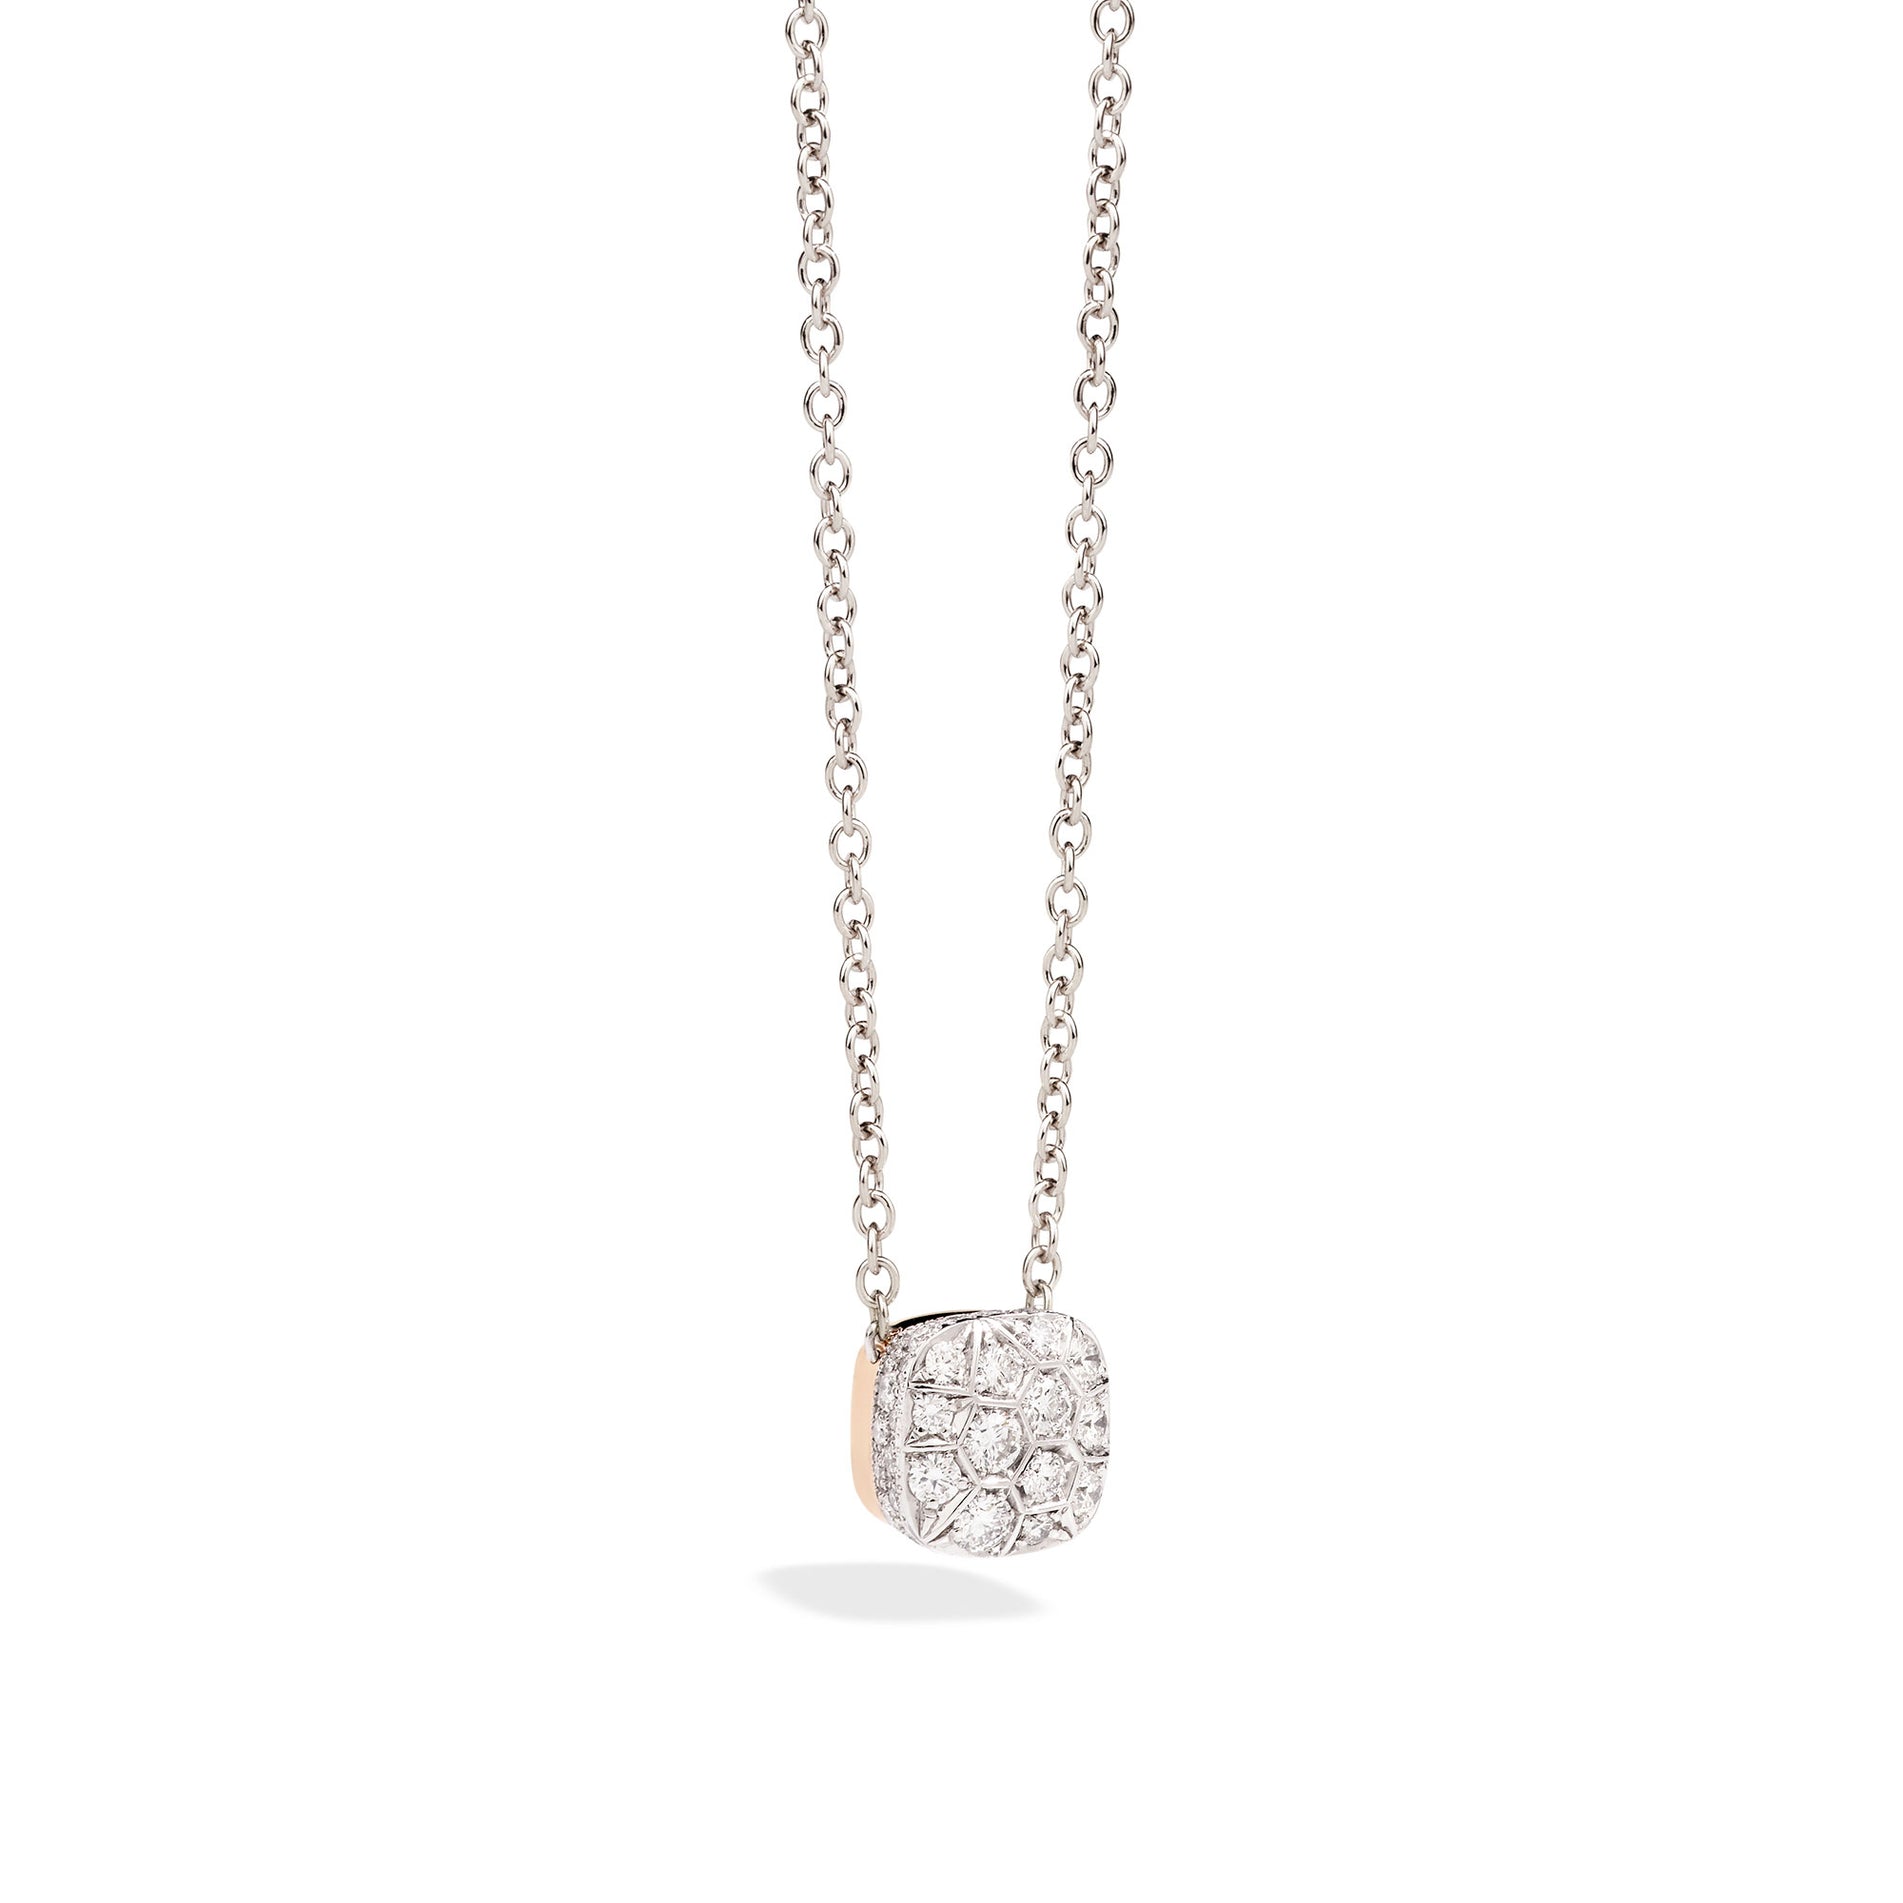 Nudo Necklace with Large Pendant in 18k Rose and White Gold with Diamonds - Orsini Jewellers NZ